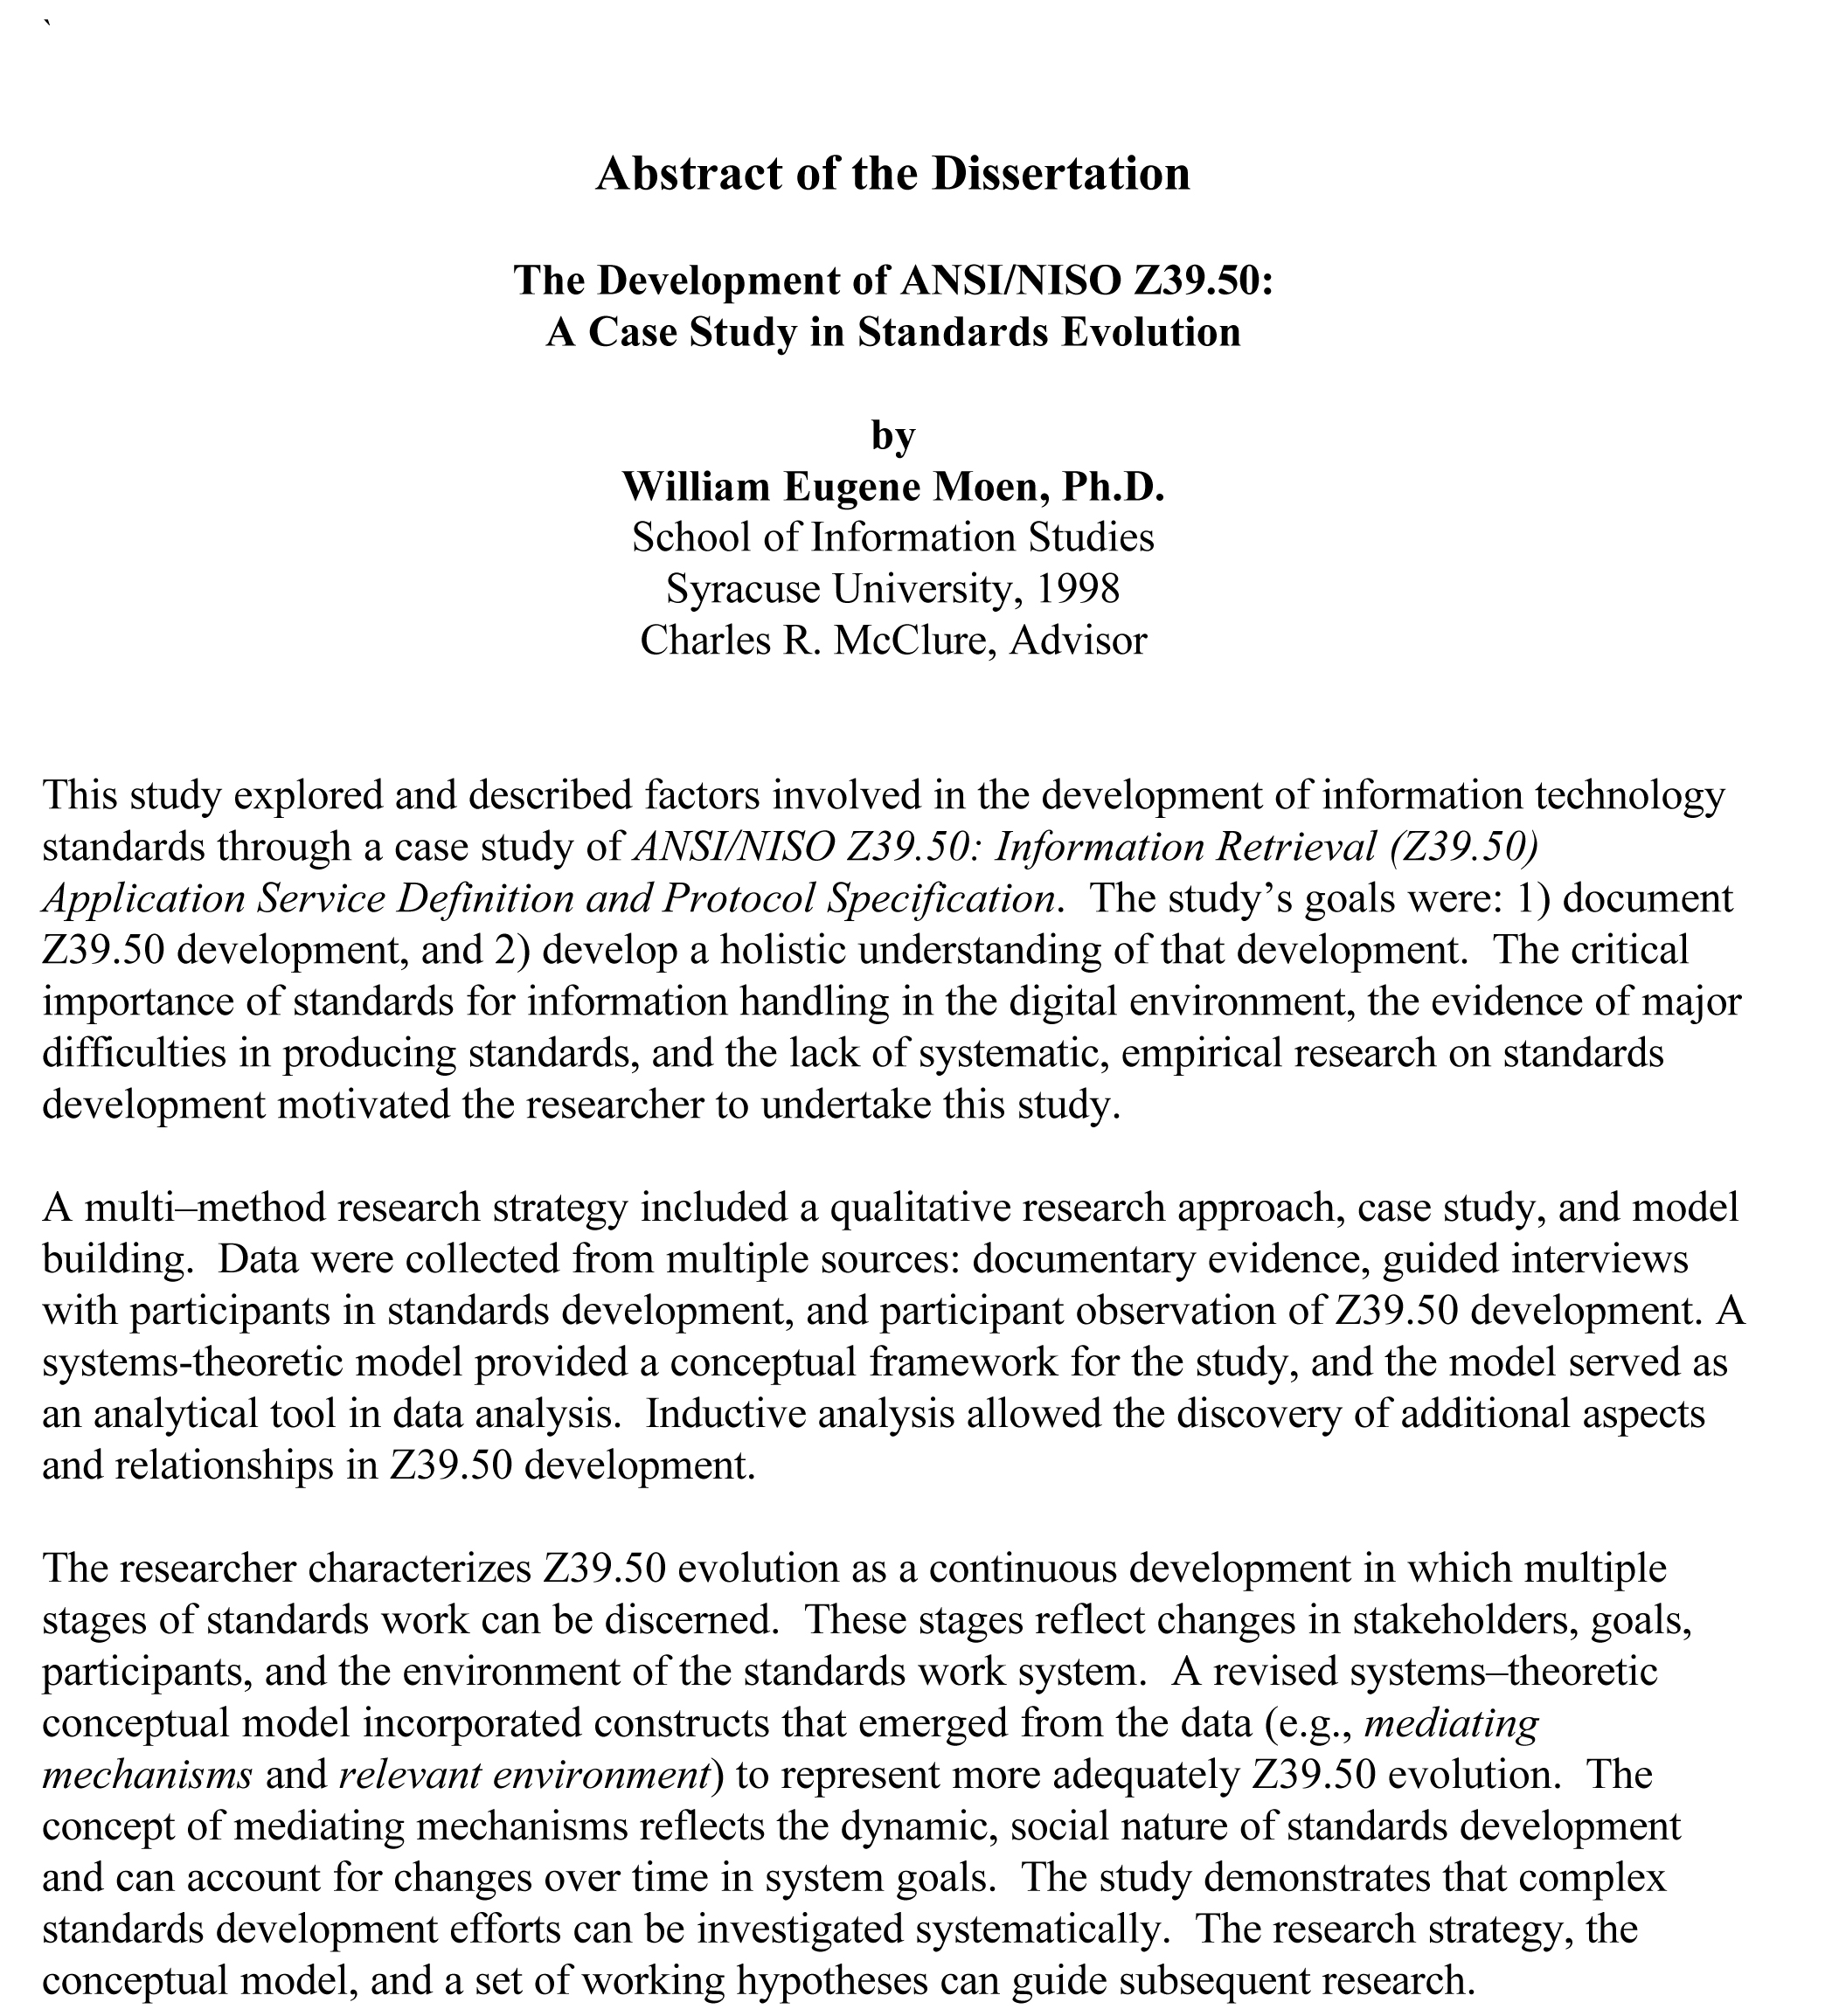 How to Write an Abstract for Your Thesis or Dissertation